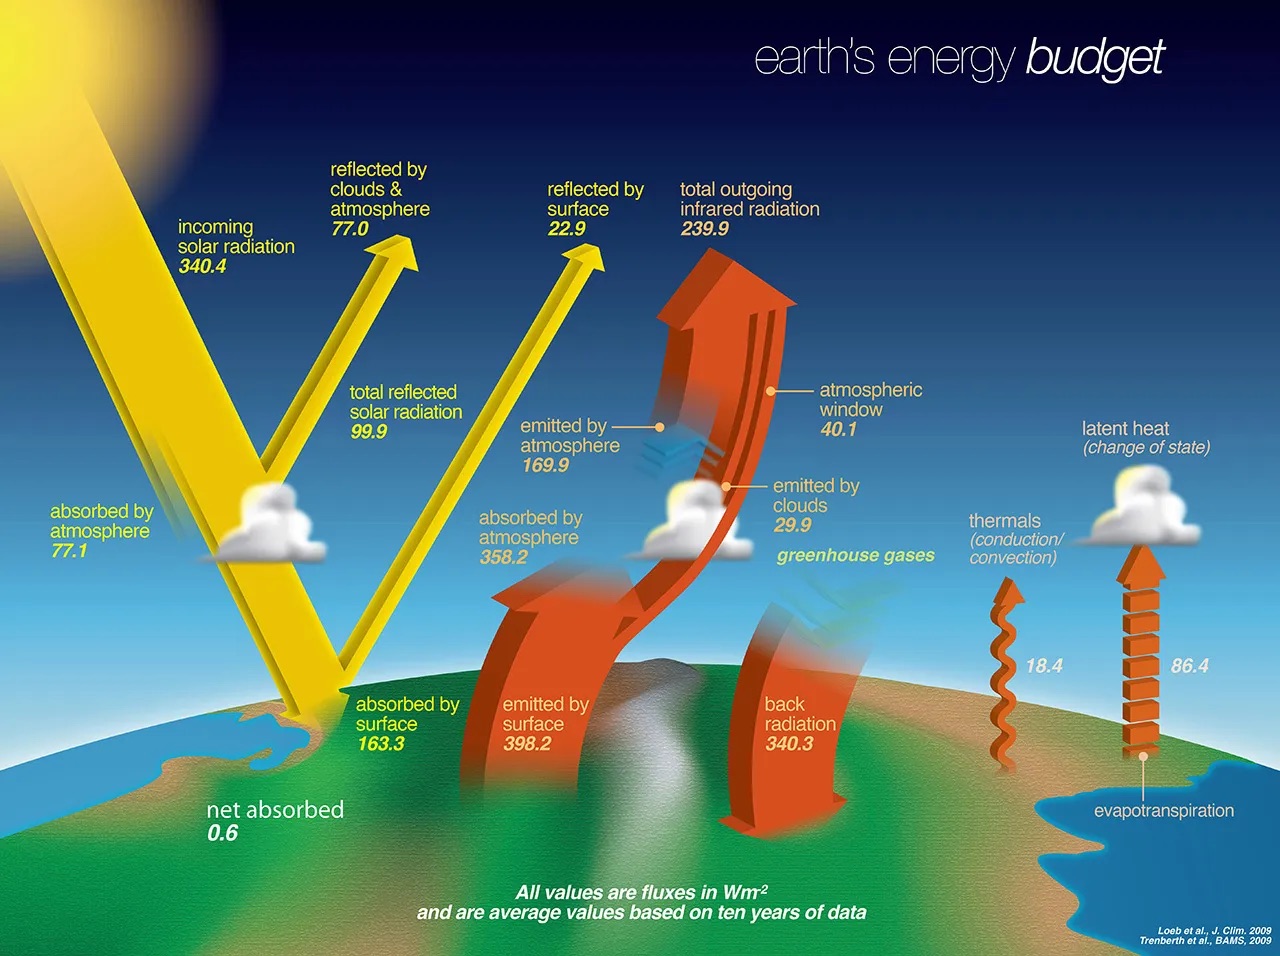 Earth’s energy budget describes the balance between the radiant energy that reaches Earth from the sun and the energy that flows from Earth back out to space.